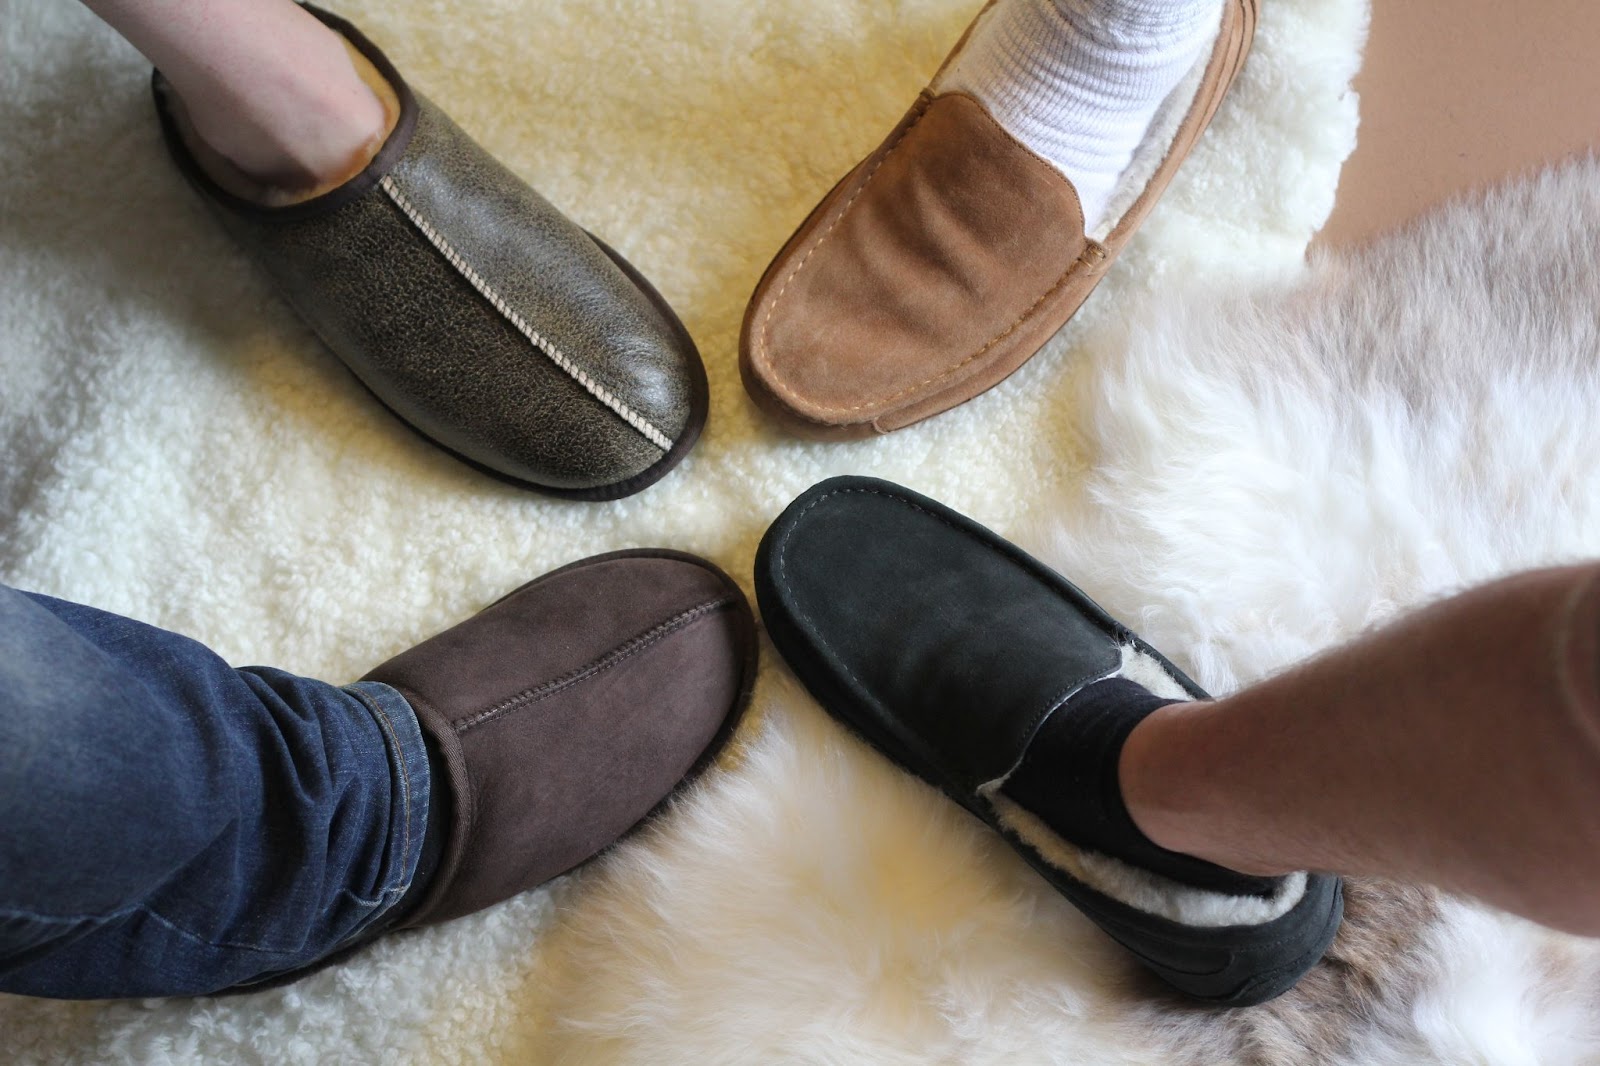 4 men's feet wearing different styles of sheepskin slippers in shades of brown and black